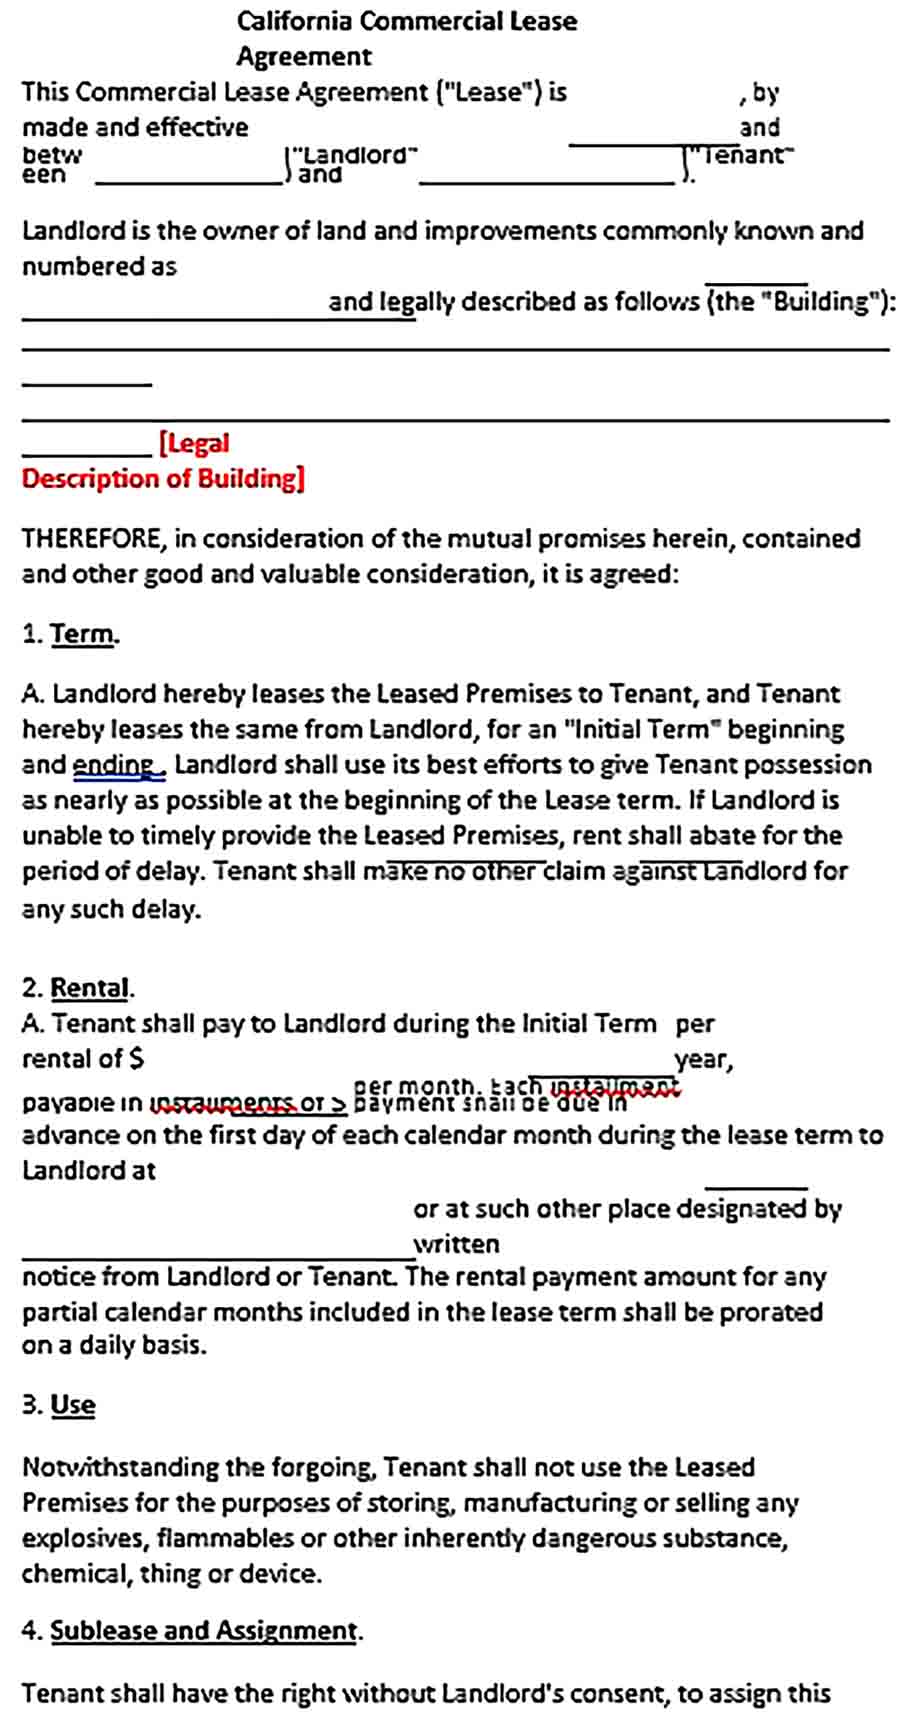 Sample Lease Commercial Agreement